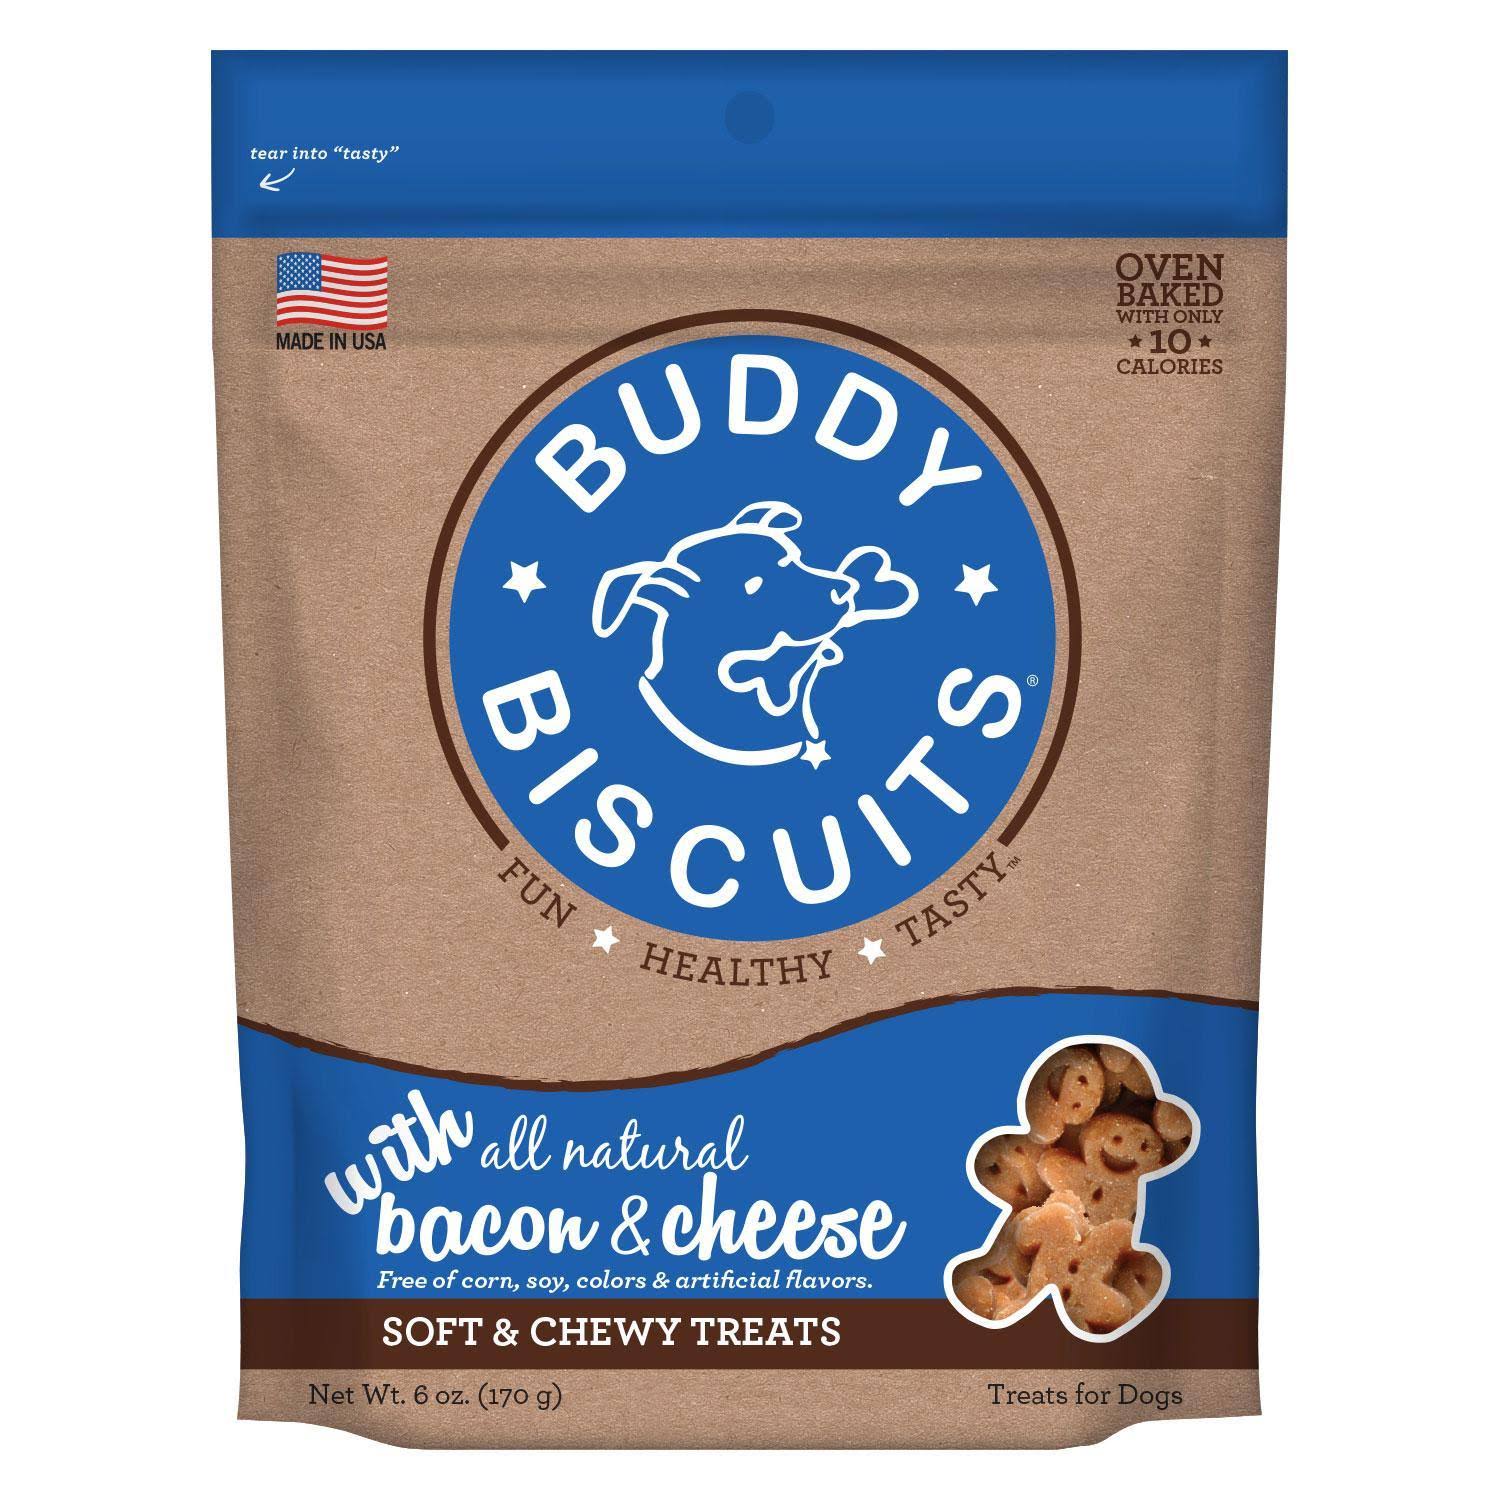 Buddy Biscuits with Bacon & Cheese Soft & Chewy Dog Treats, 6-oz bag